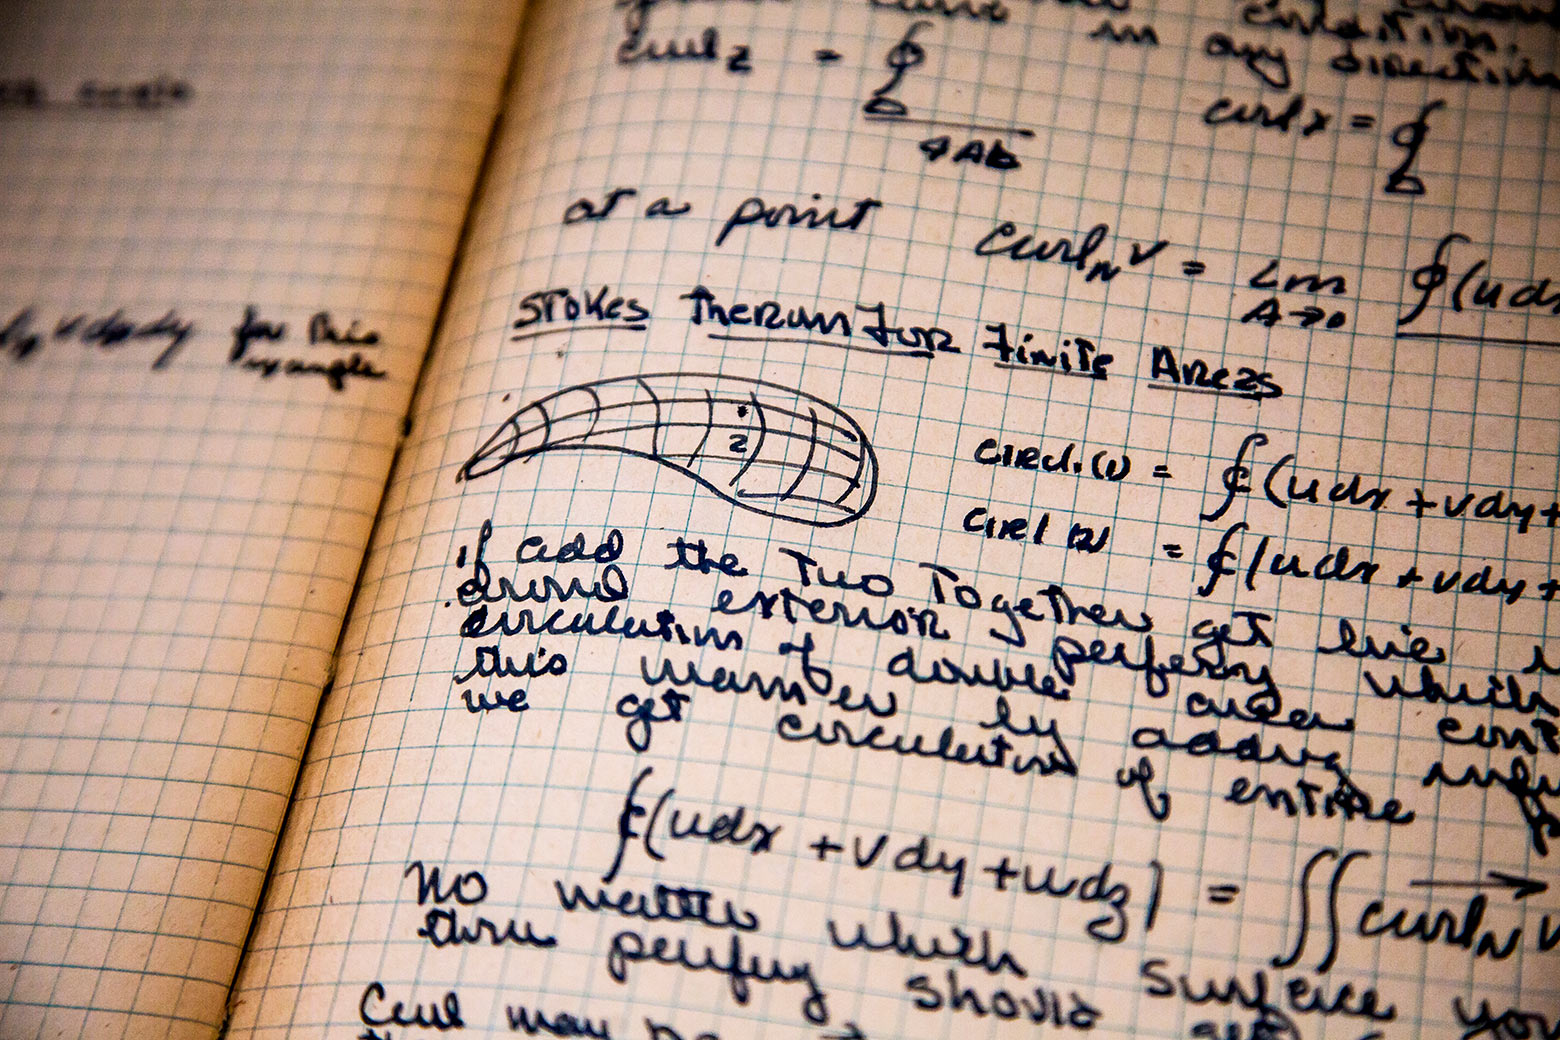 Dr. Beyster’s notebook, on display at the U-M Nuclear Engineering Building